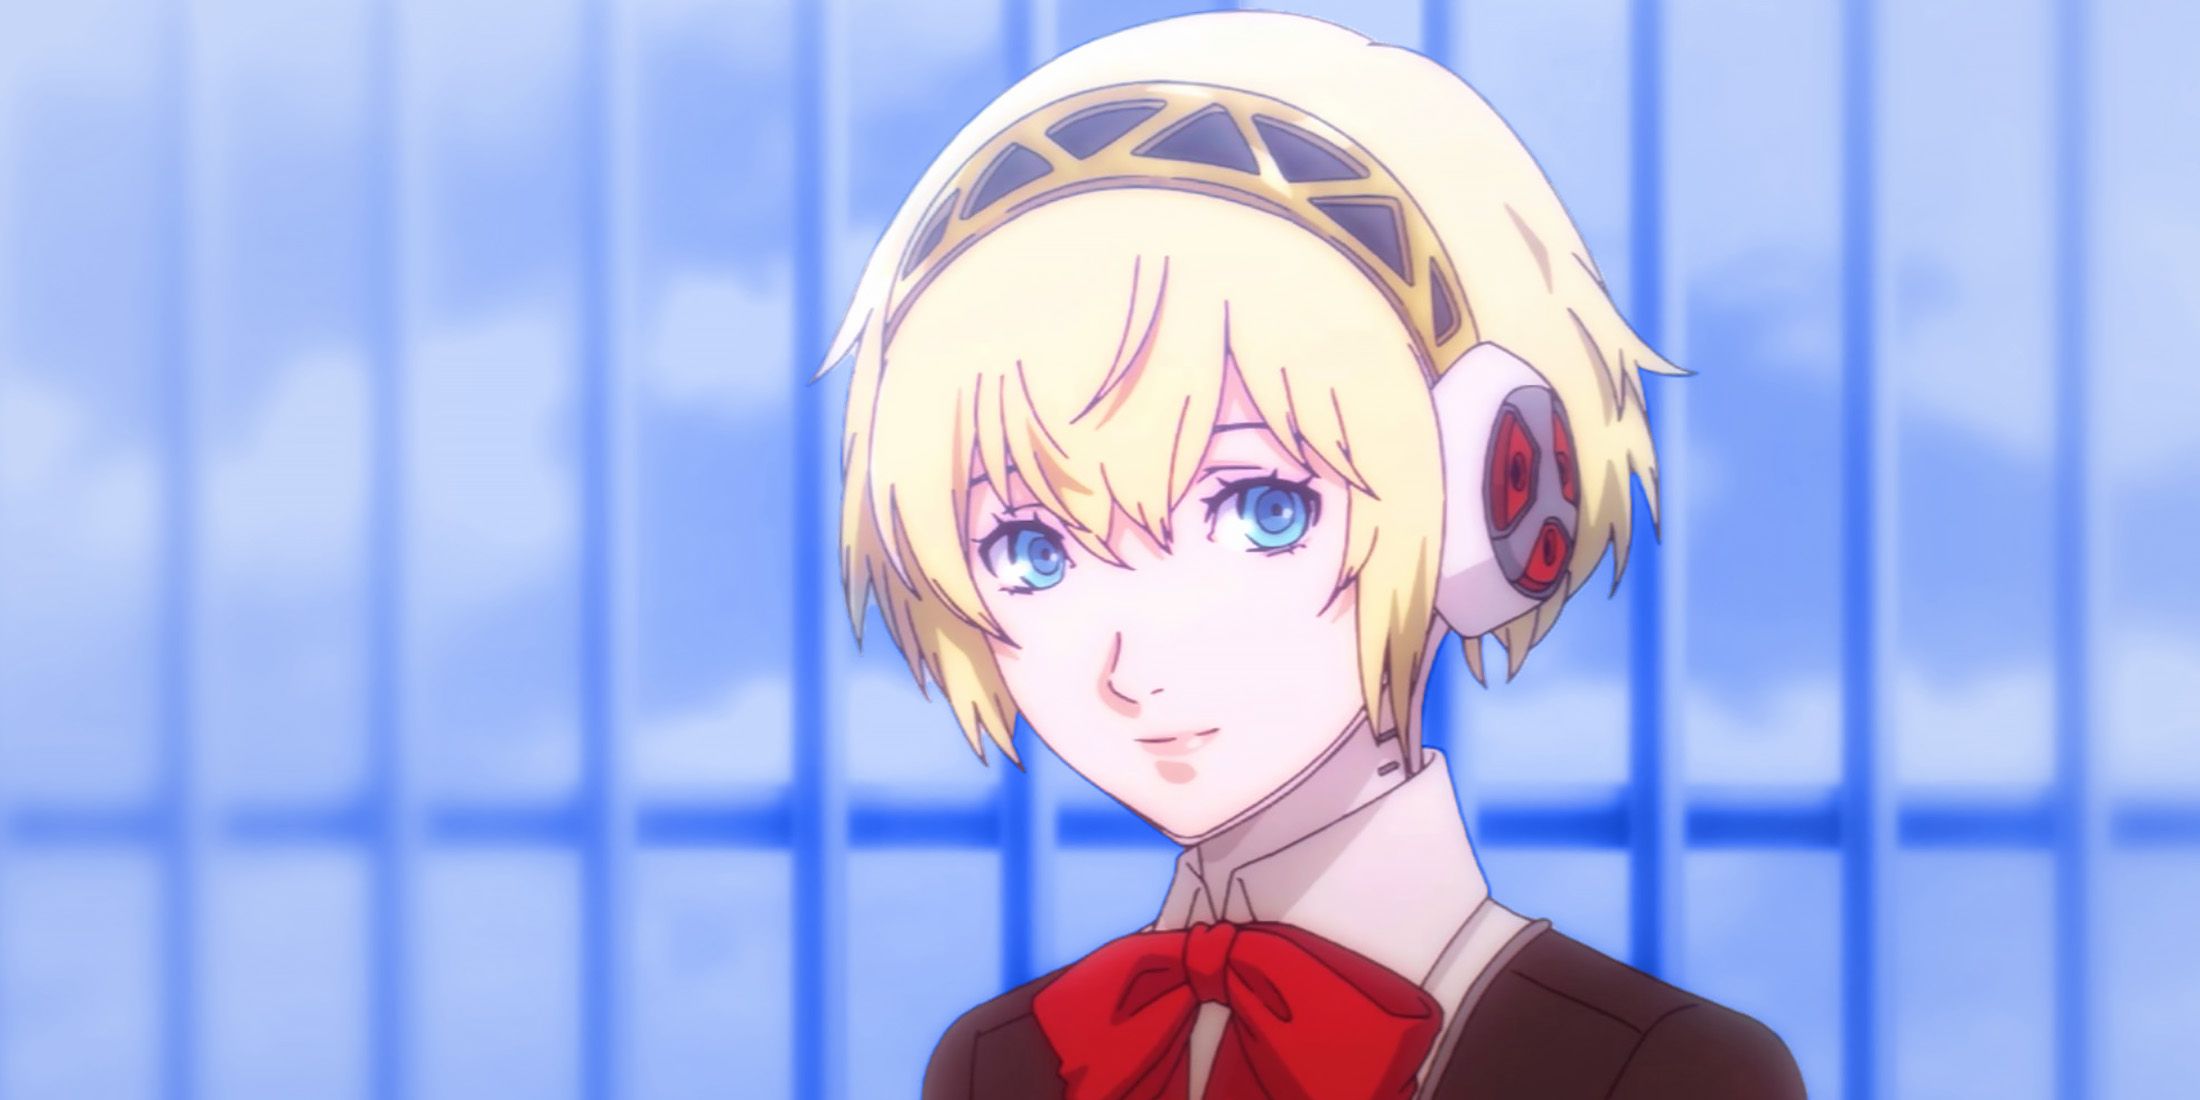 Aigis smiling on school rooftop medium close-up Persona 3 Reload ending screenshot blue background